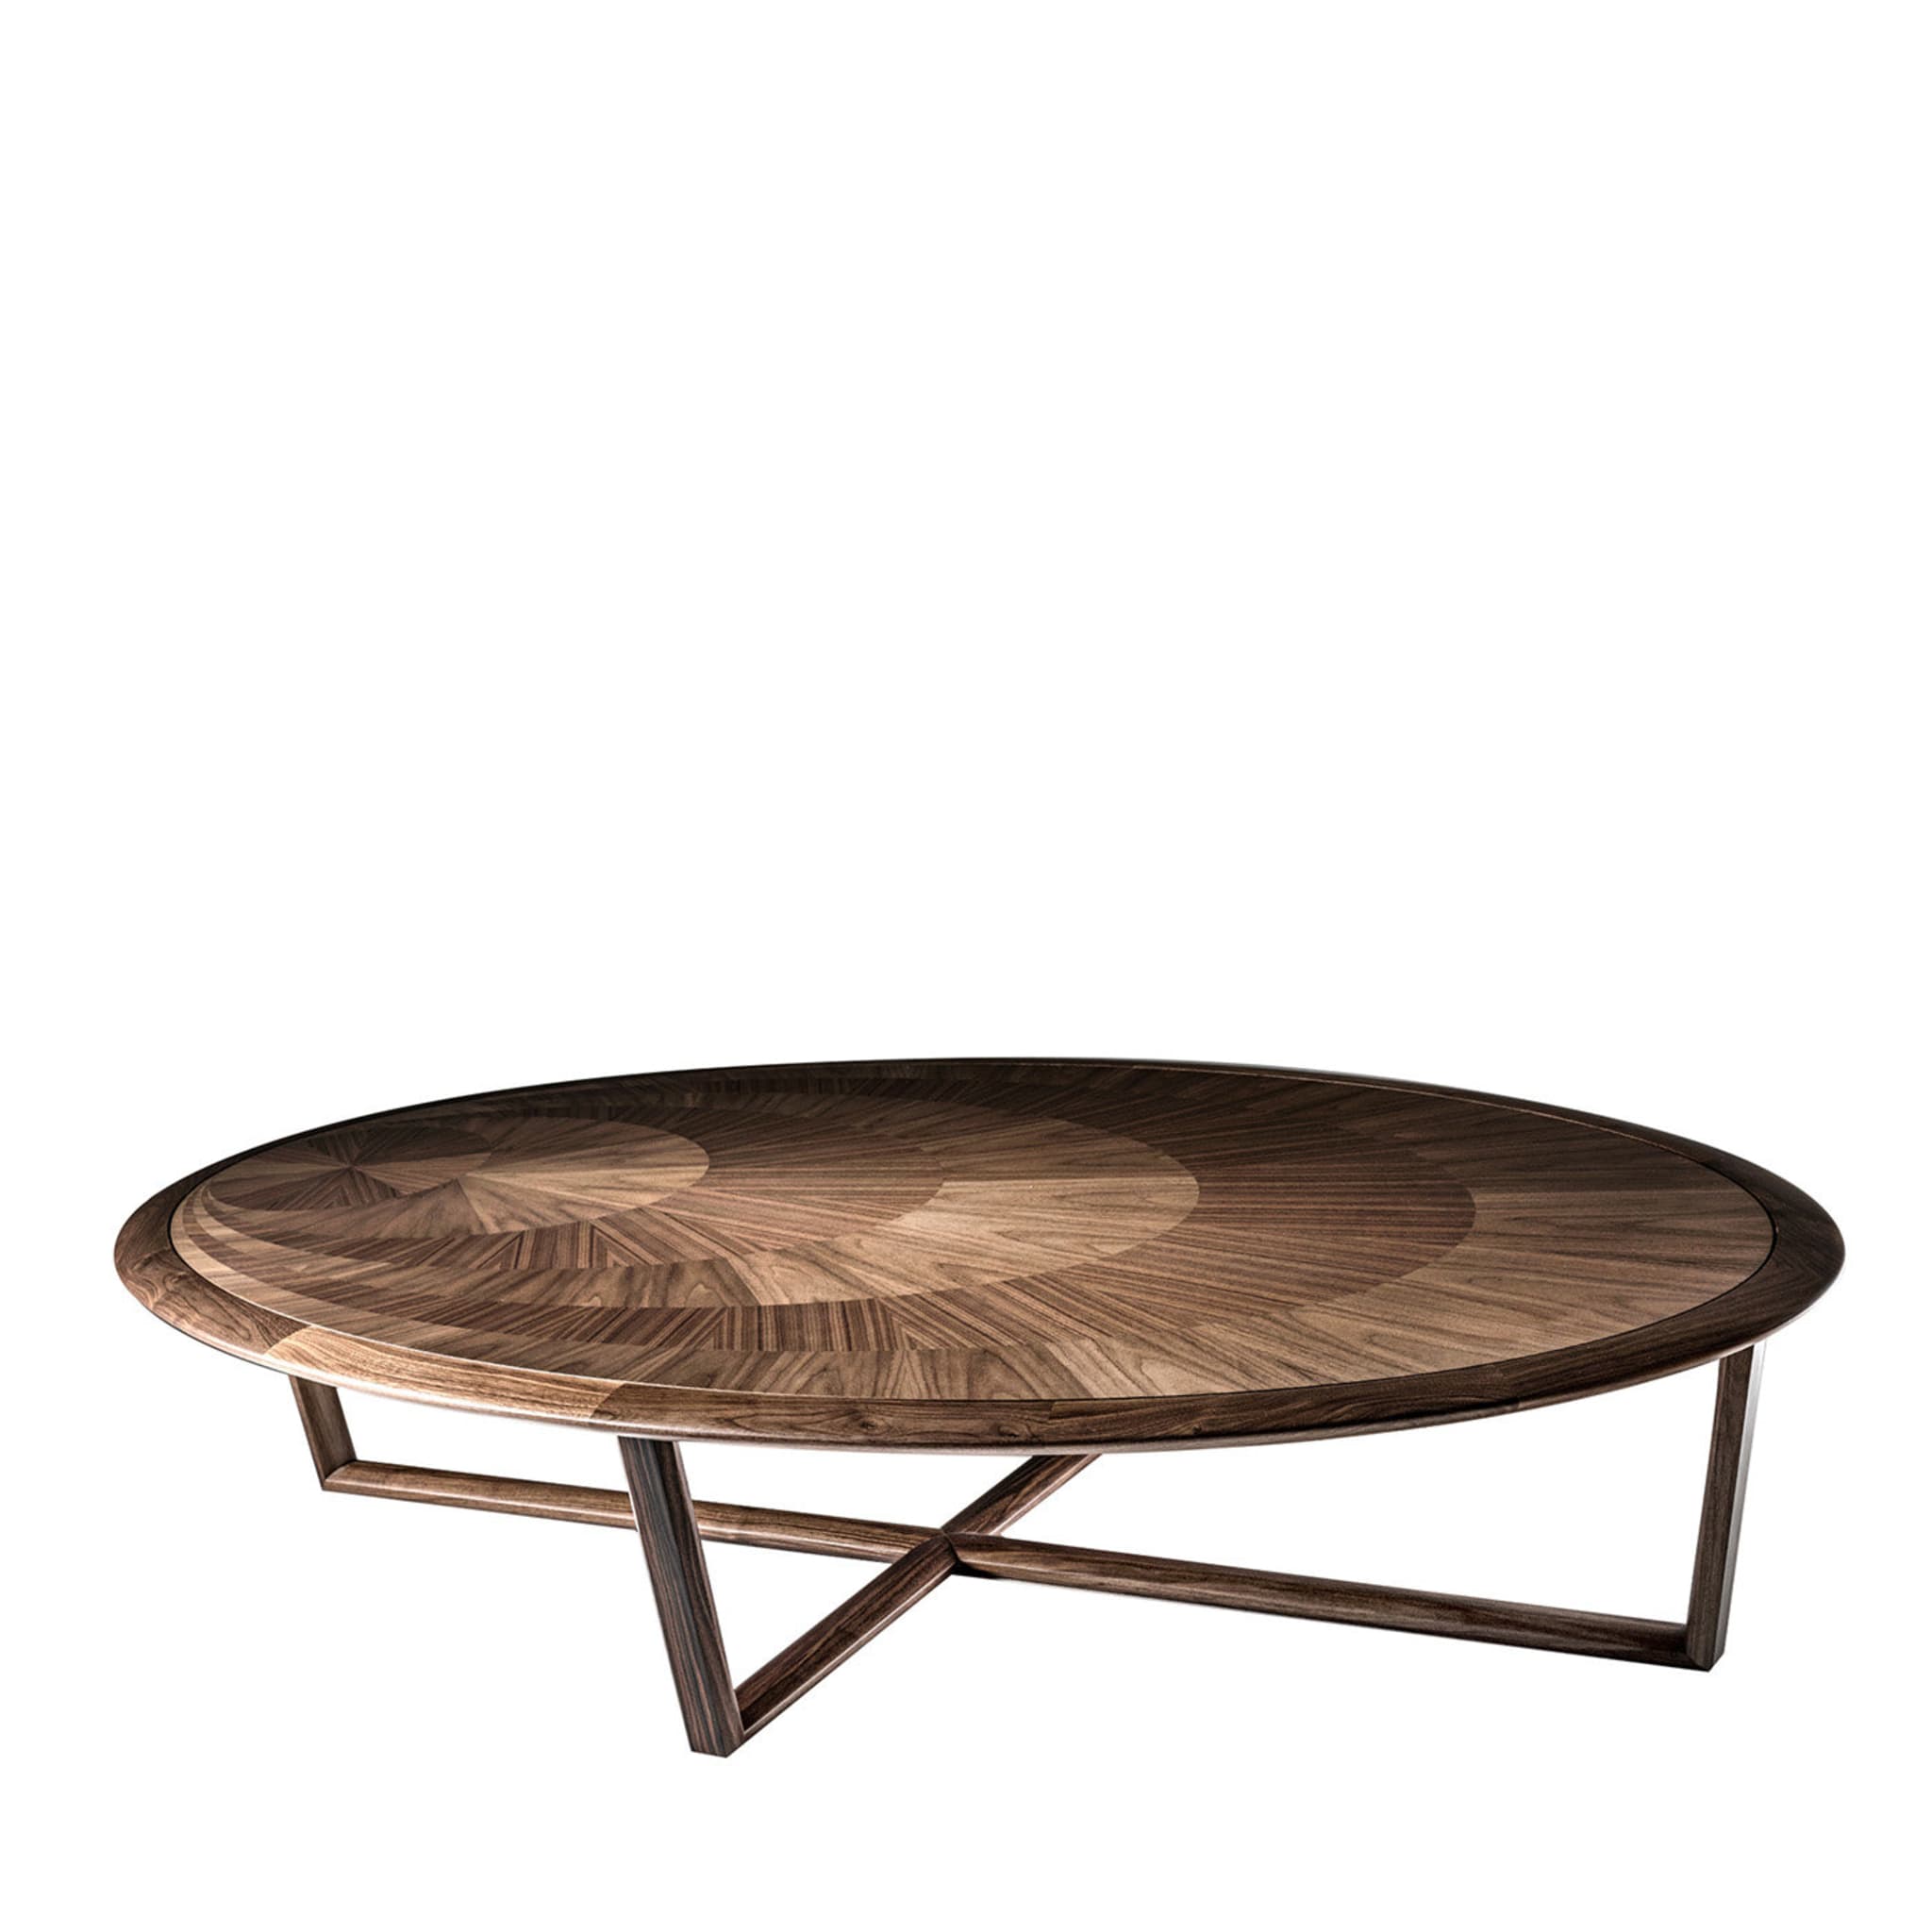 Piramide Coffee Table by Ivano Colombo - Main view